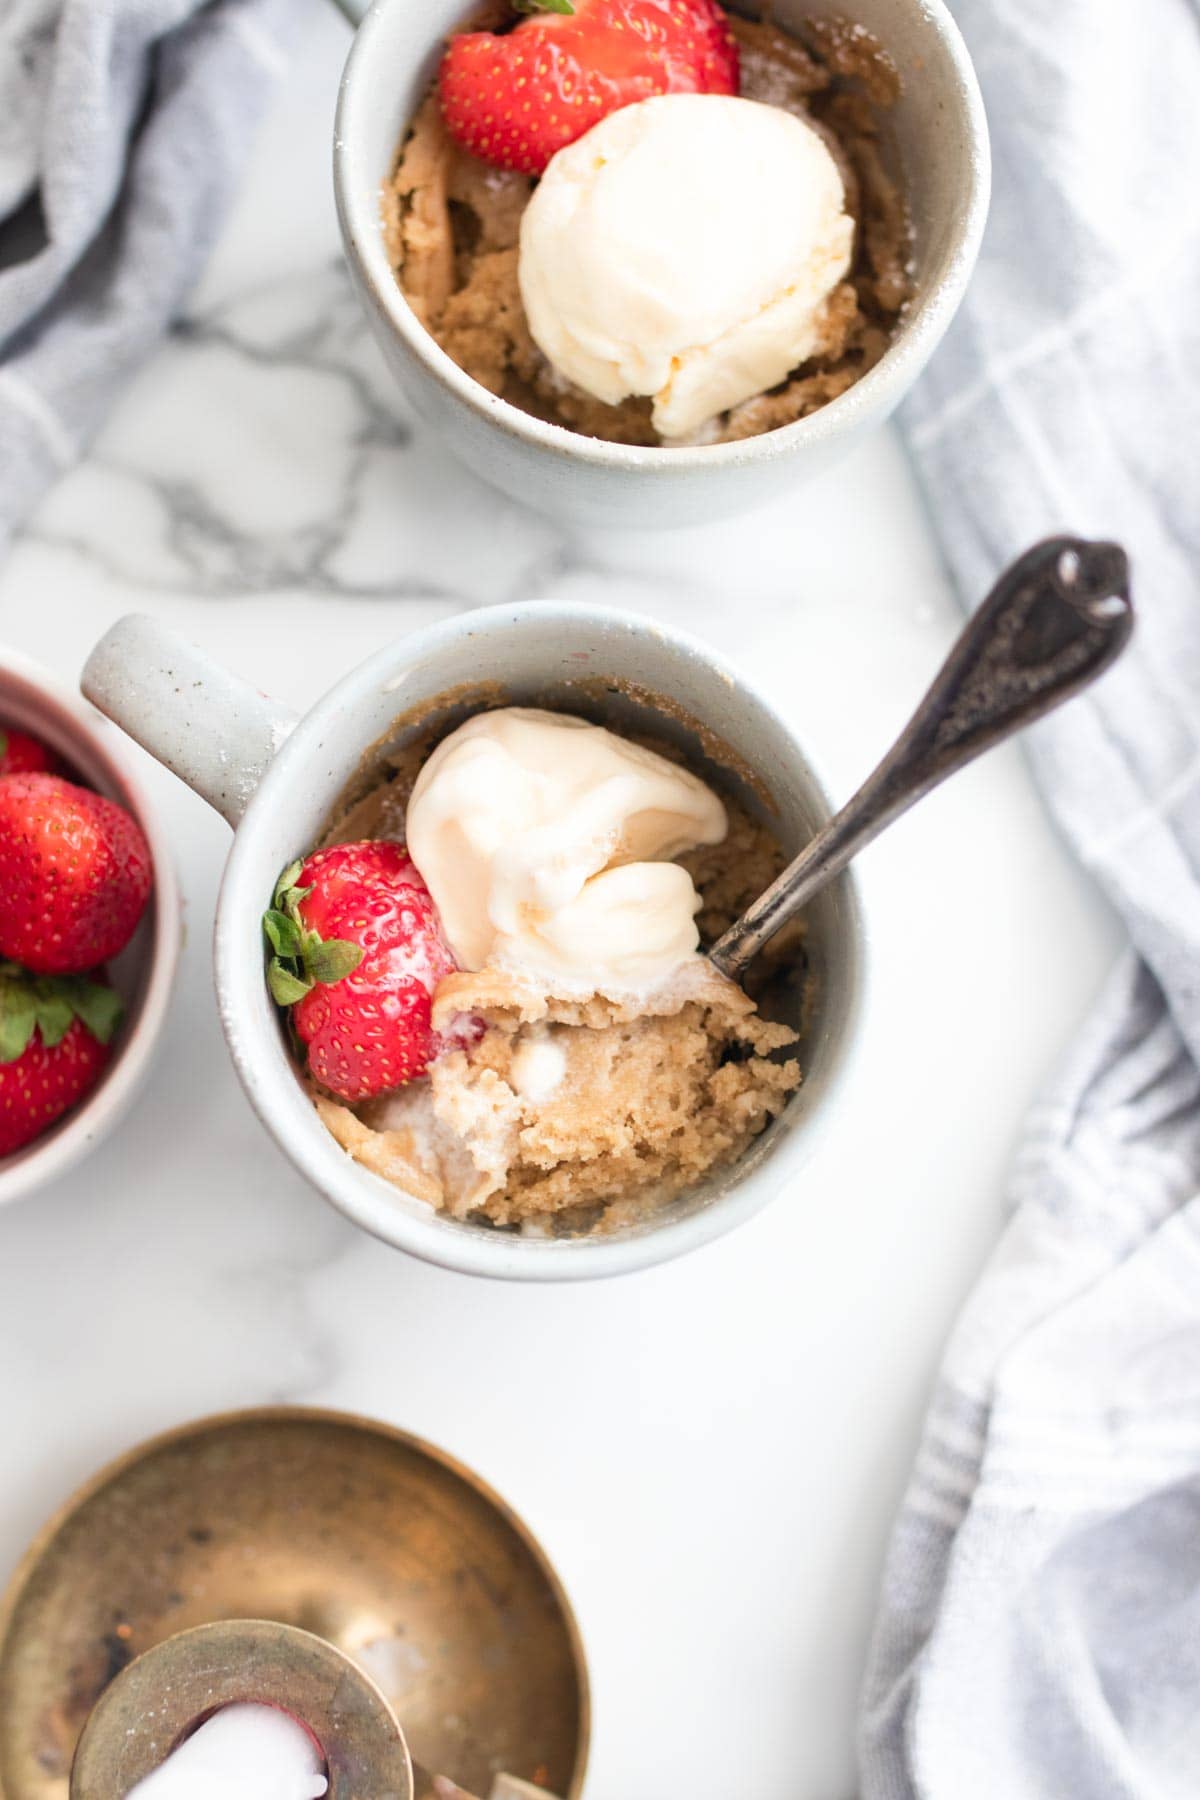 Melted vanilla ice cream on top of two mug cakes with strawberries.